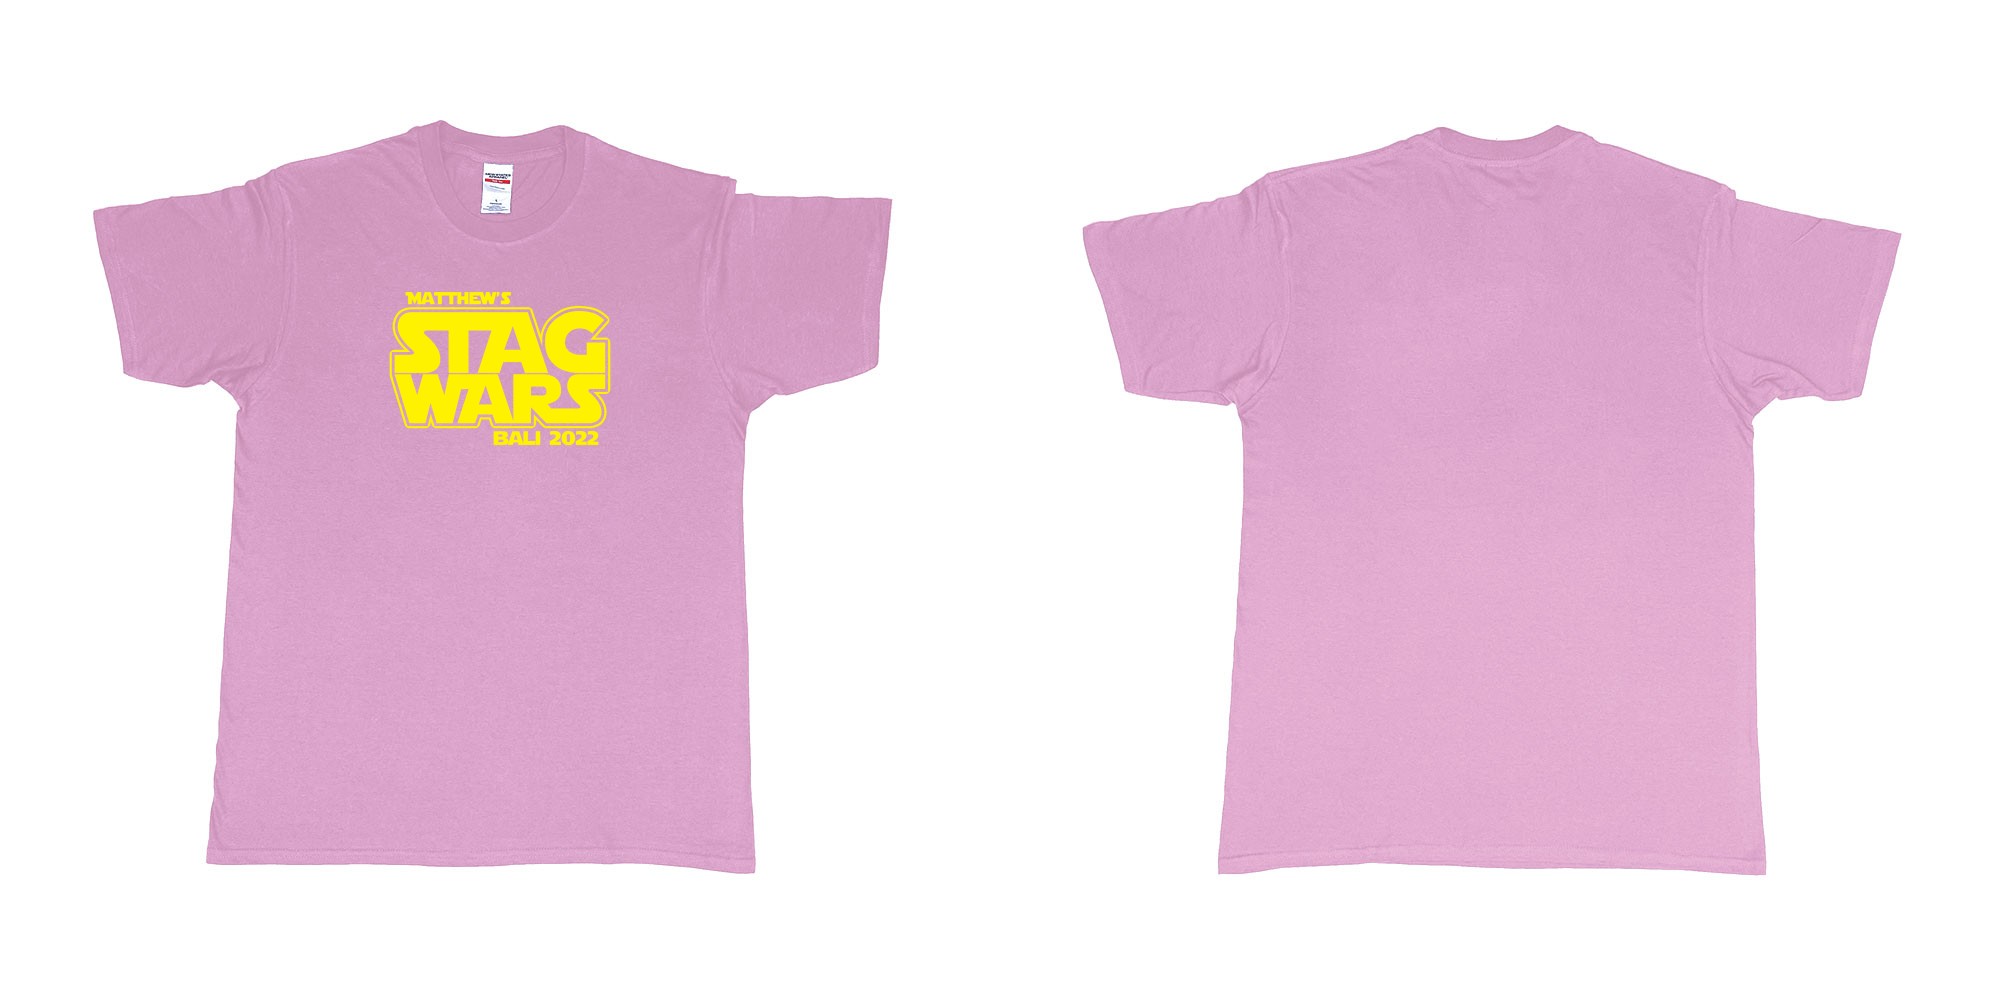 Custom tshirt design TPW Star Wars Stag in fabric color light-pink choice your own text made in Bali by The Pirate Way